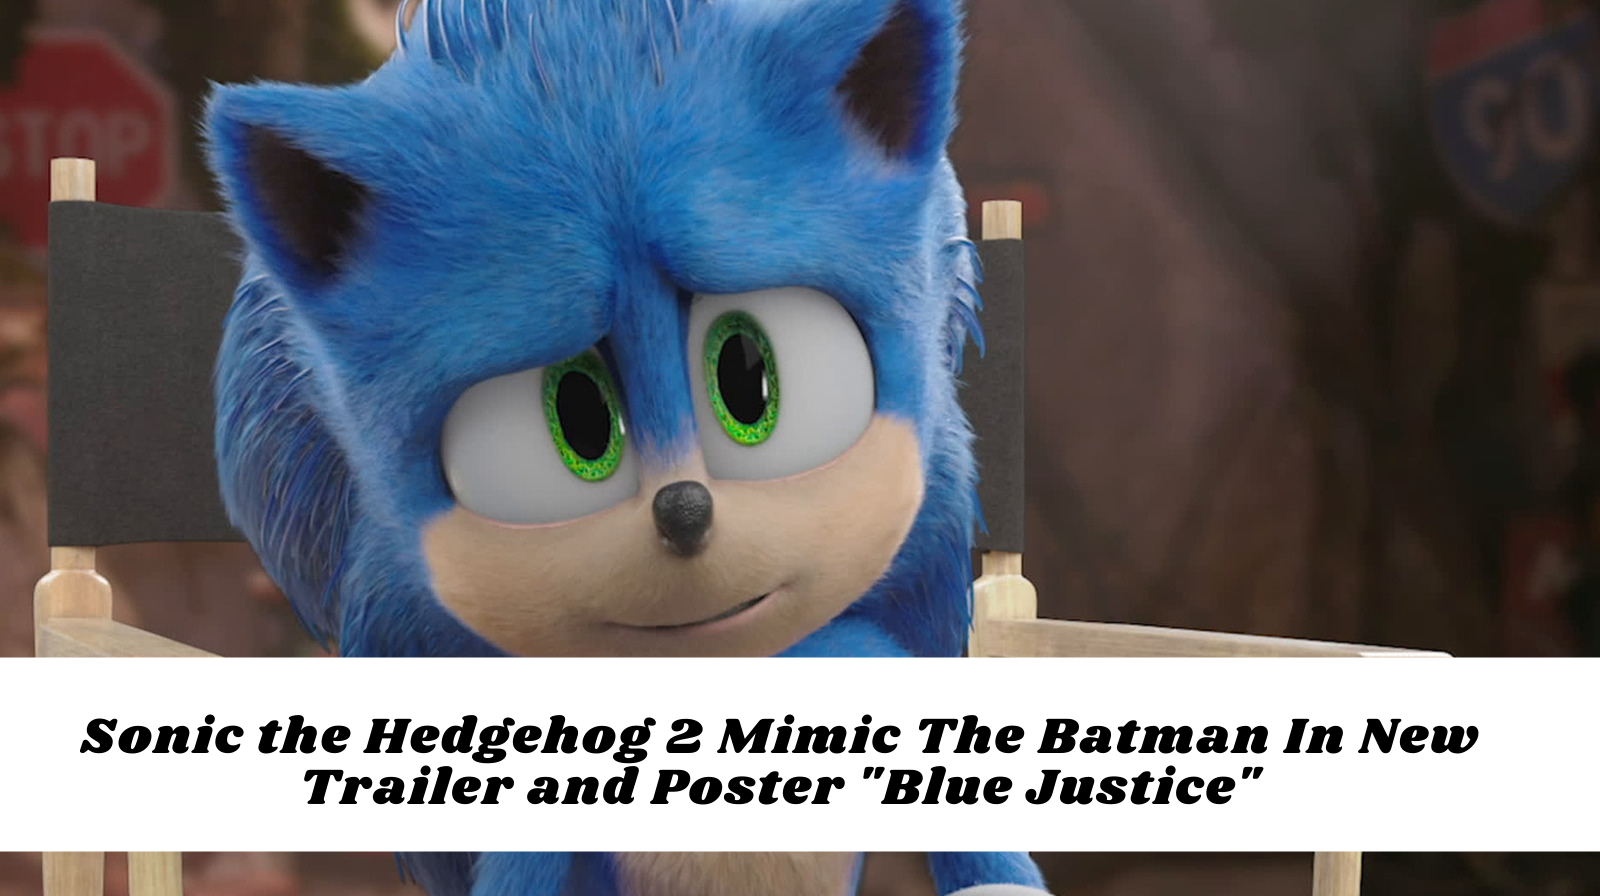 Sonic the Hedgehog 2 Mimic The Batman In New Trailer and Poster "Blue Justice"